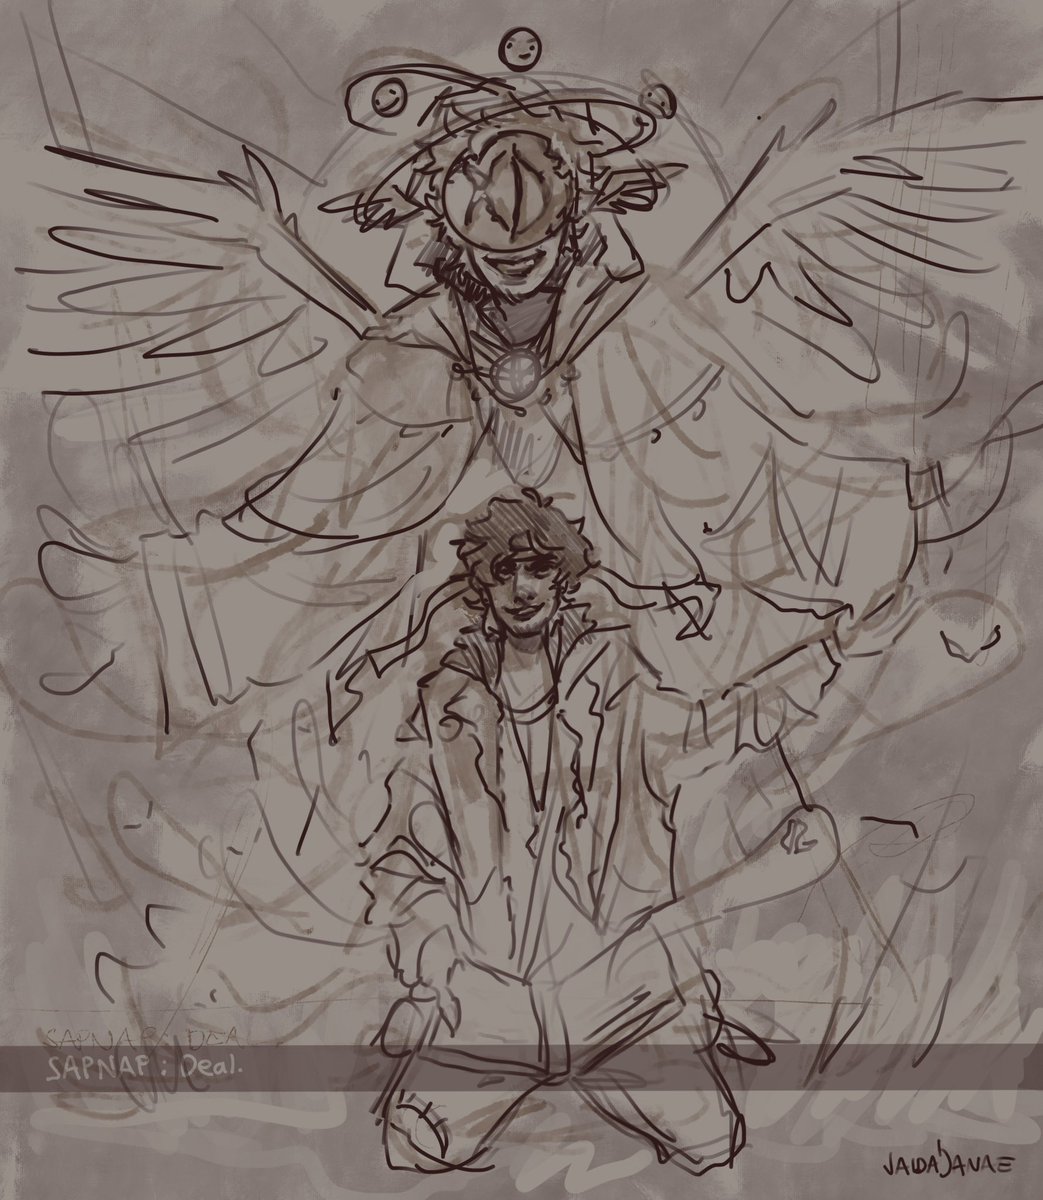 GUYS WOAH I DID ART😱 Ok this is super messy and rough but I was inspired to sketch something based off of sapnaps recent lore stream, thus the birth of this horrible wonderful scribble :)

Should I bother rendering it lol?#dsmpfanart 